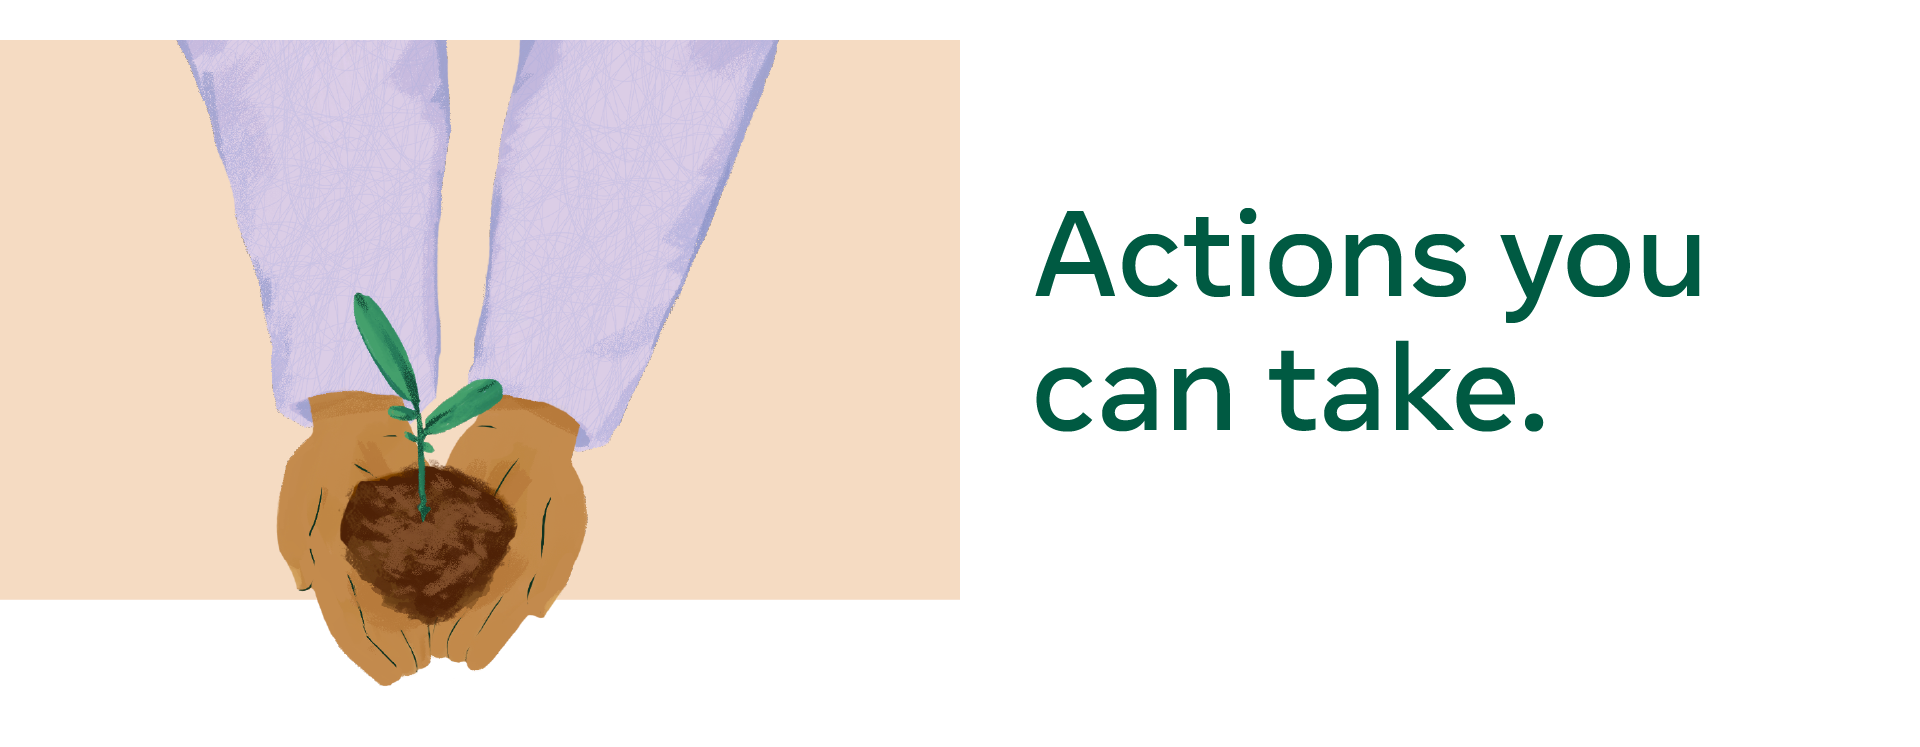 Actions you can take graphic